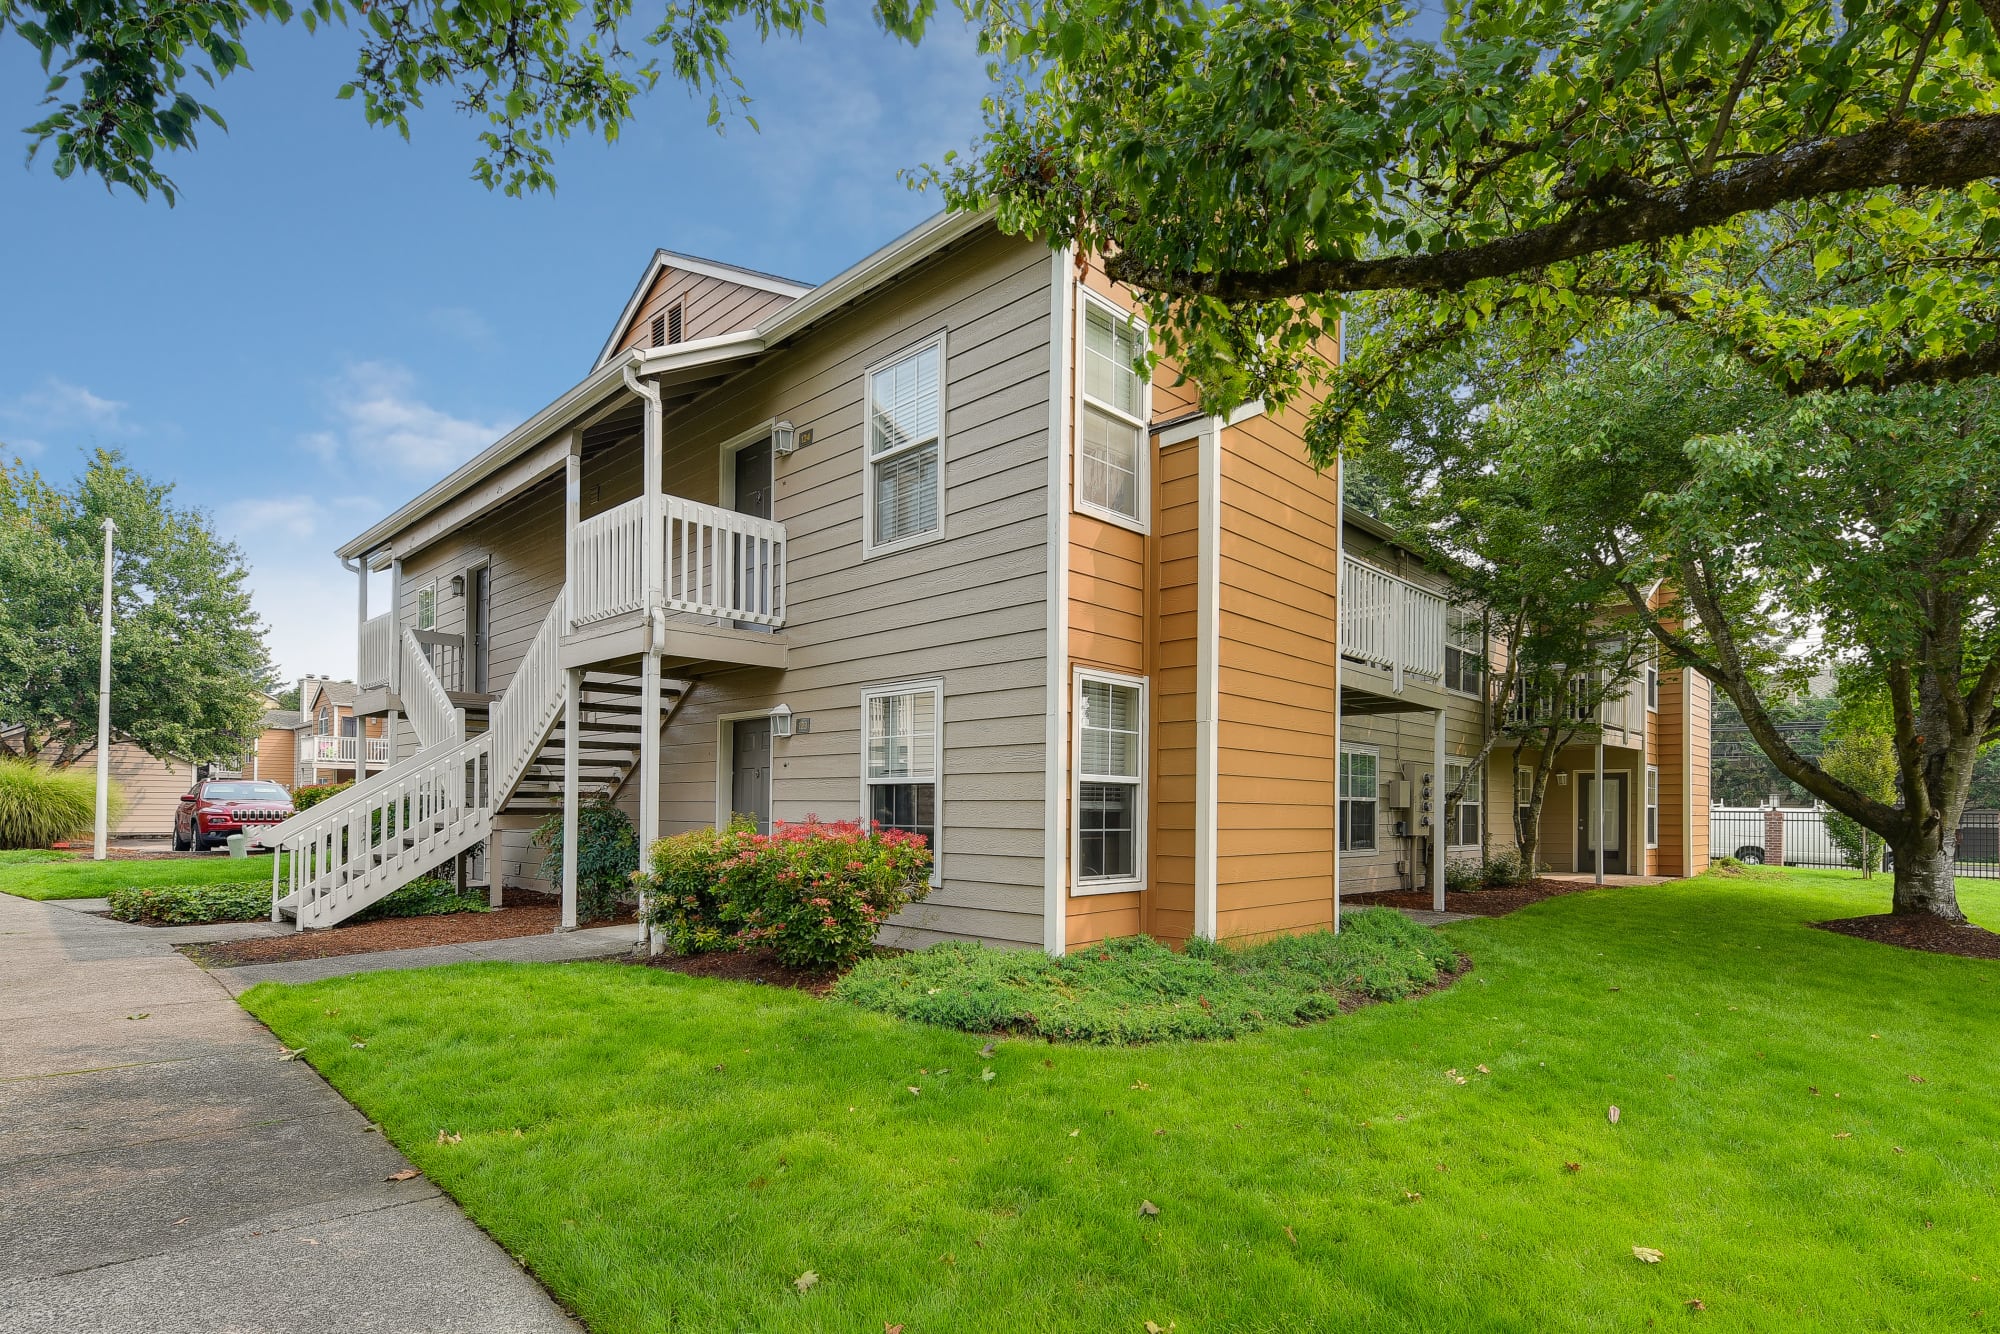 The exterior of the building surrounded by lush green grass at Carriage Park Apartments in Vancouver, Washington